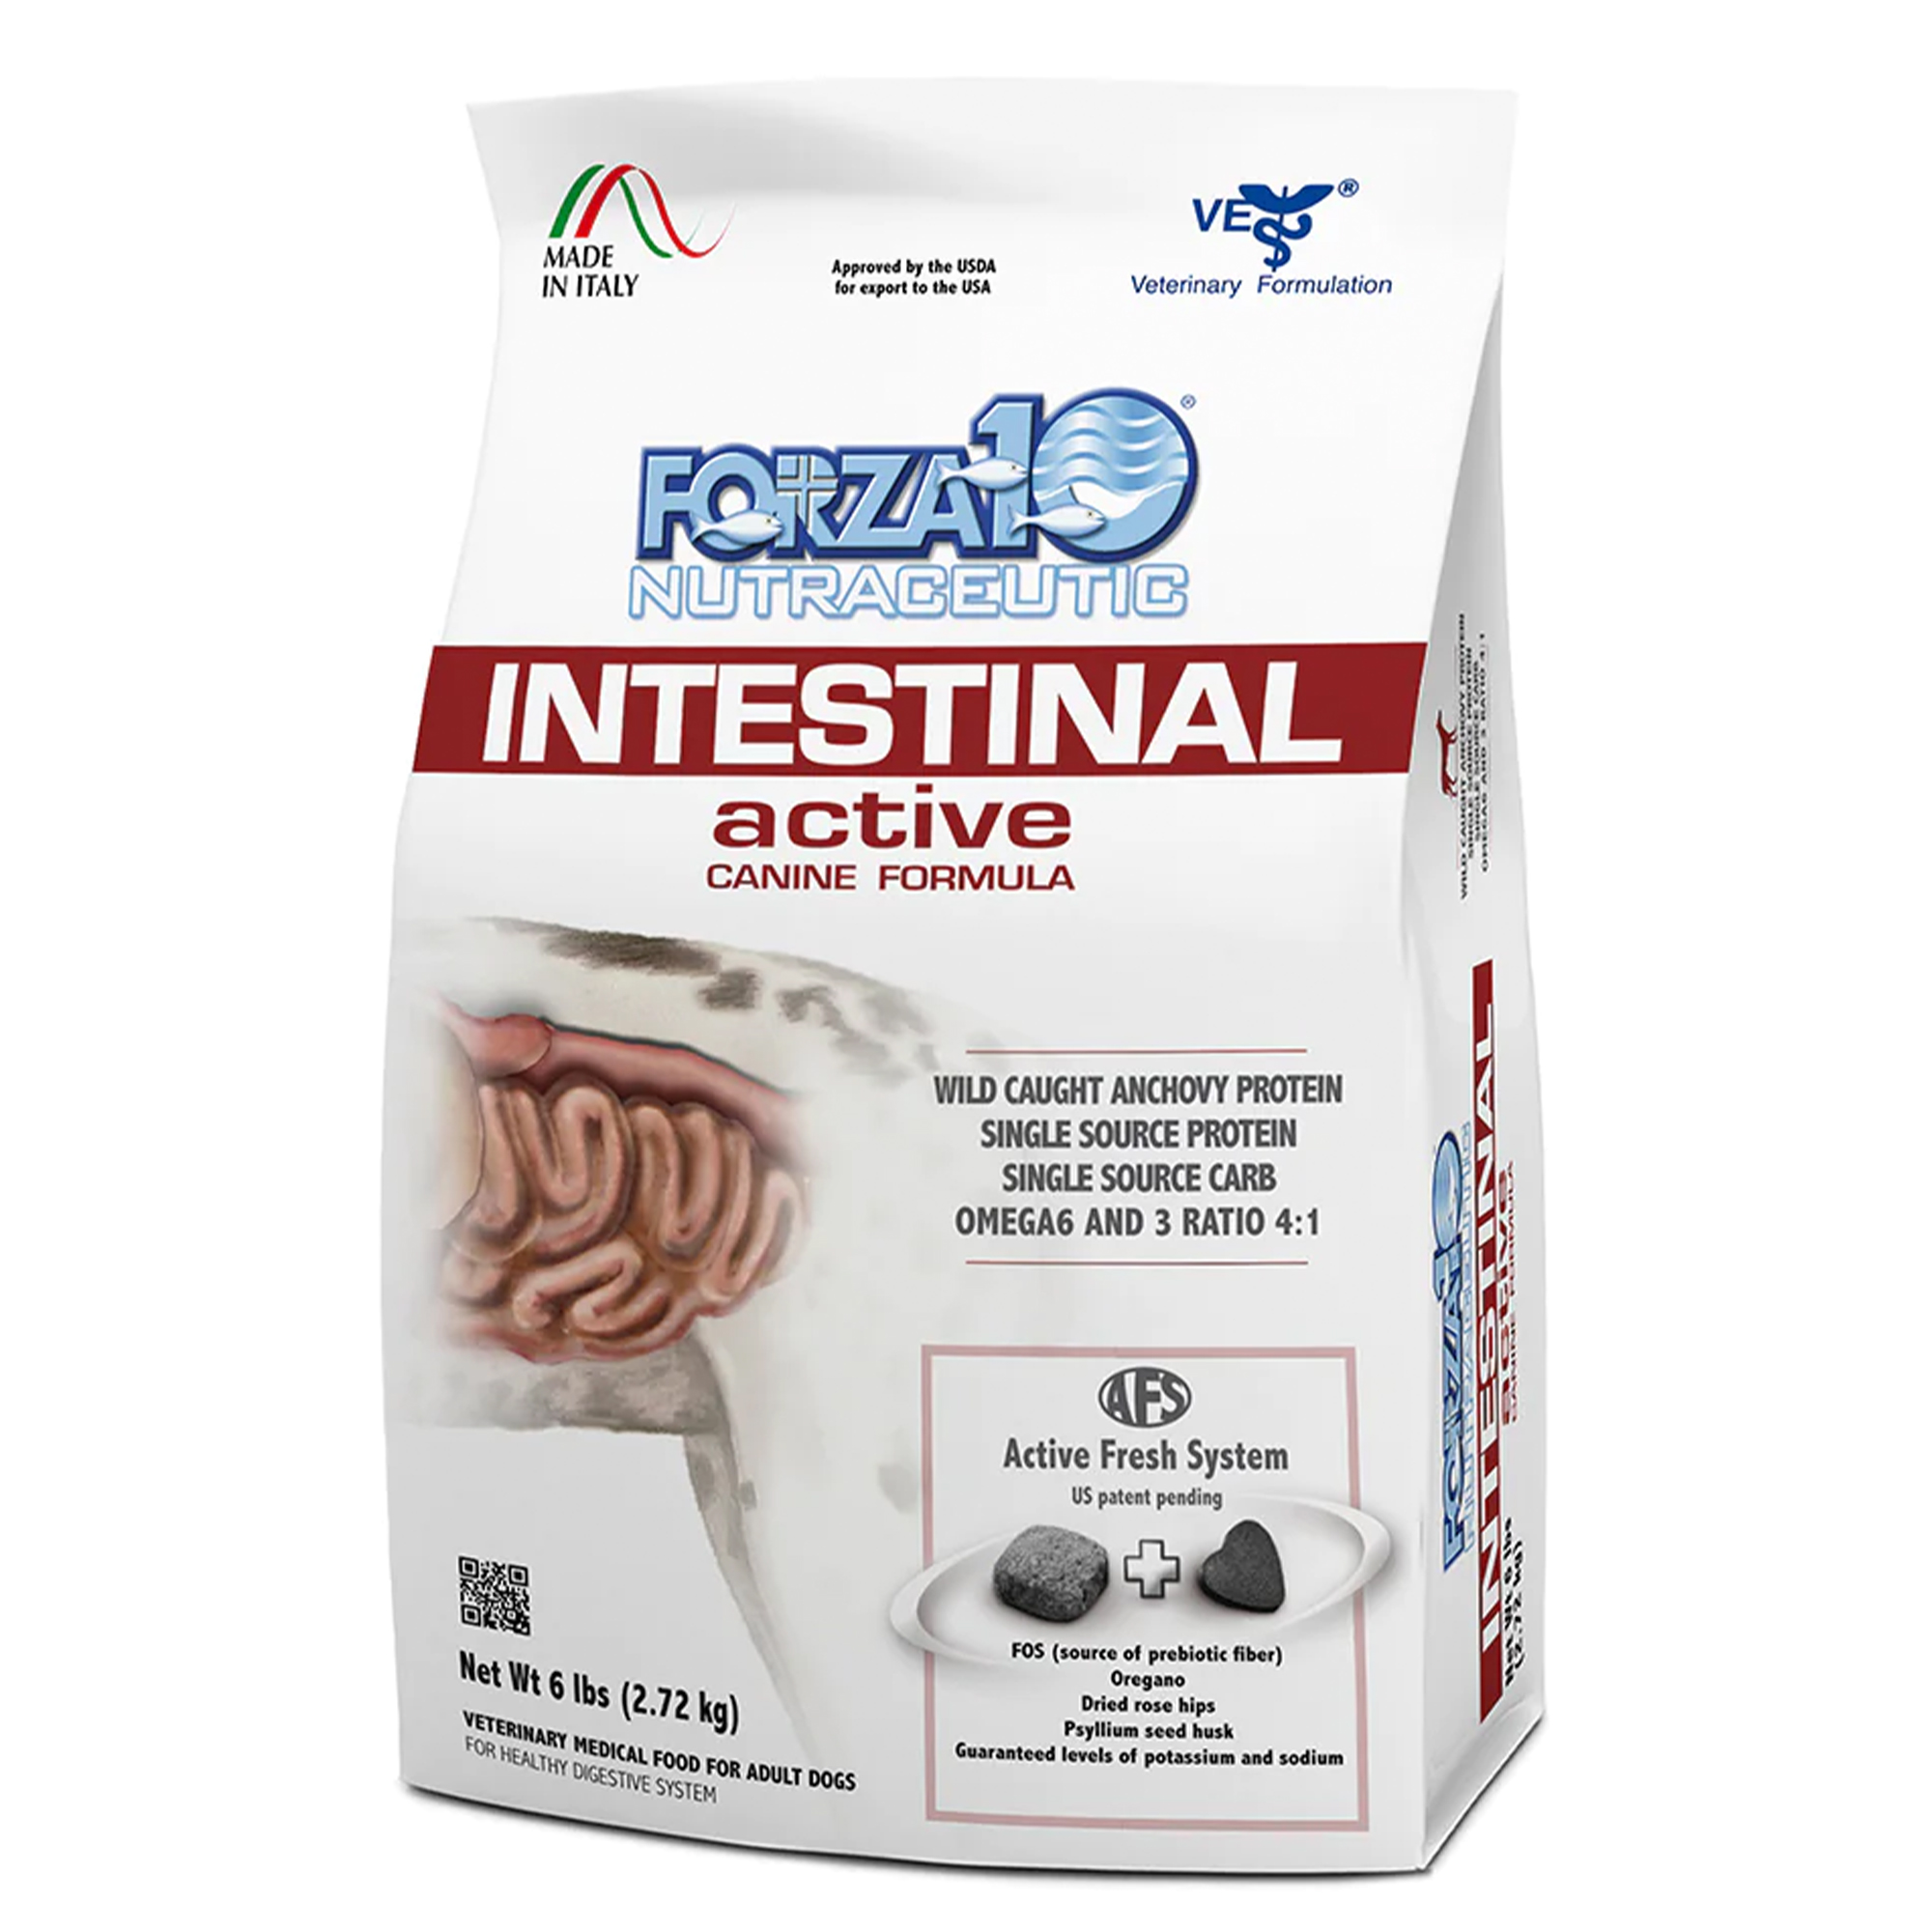 Forza10 Nutraceutic Active Intestinal Support Diet Dry Dog Food Usage